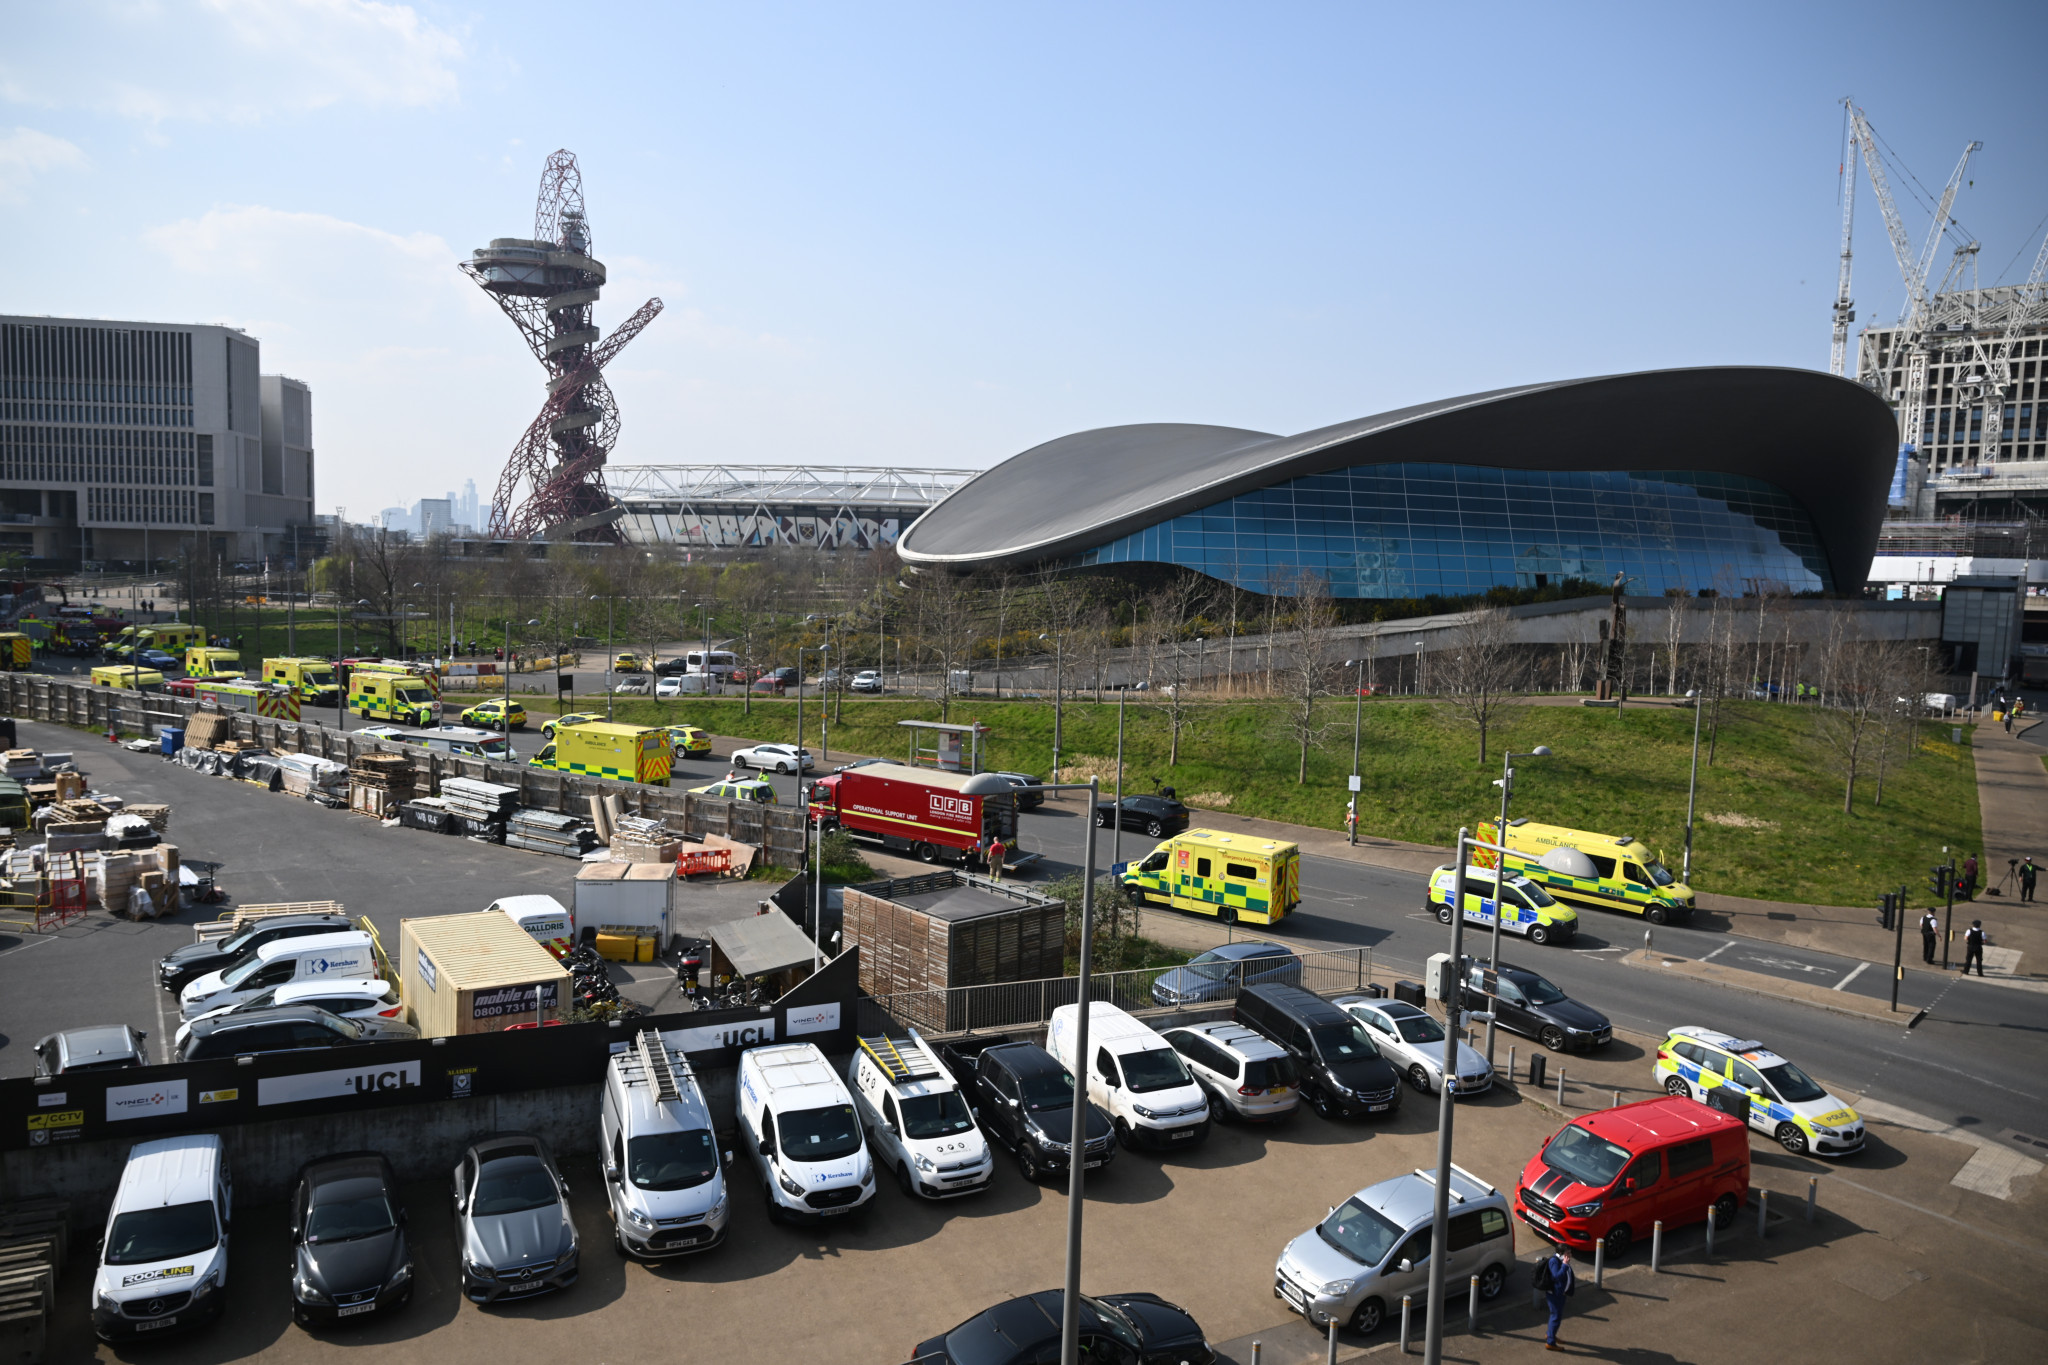 London Aquatics Centre reopens a month after gas leak which left 29 in hospital